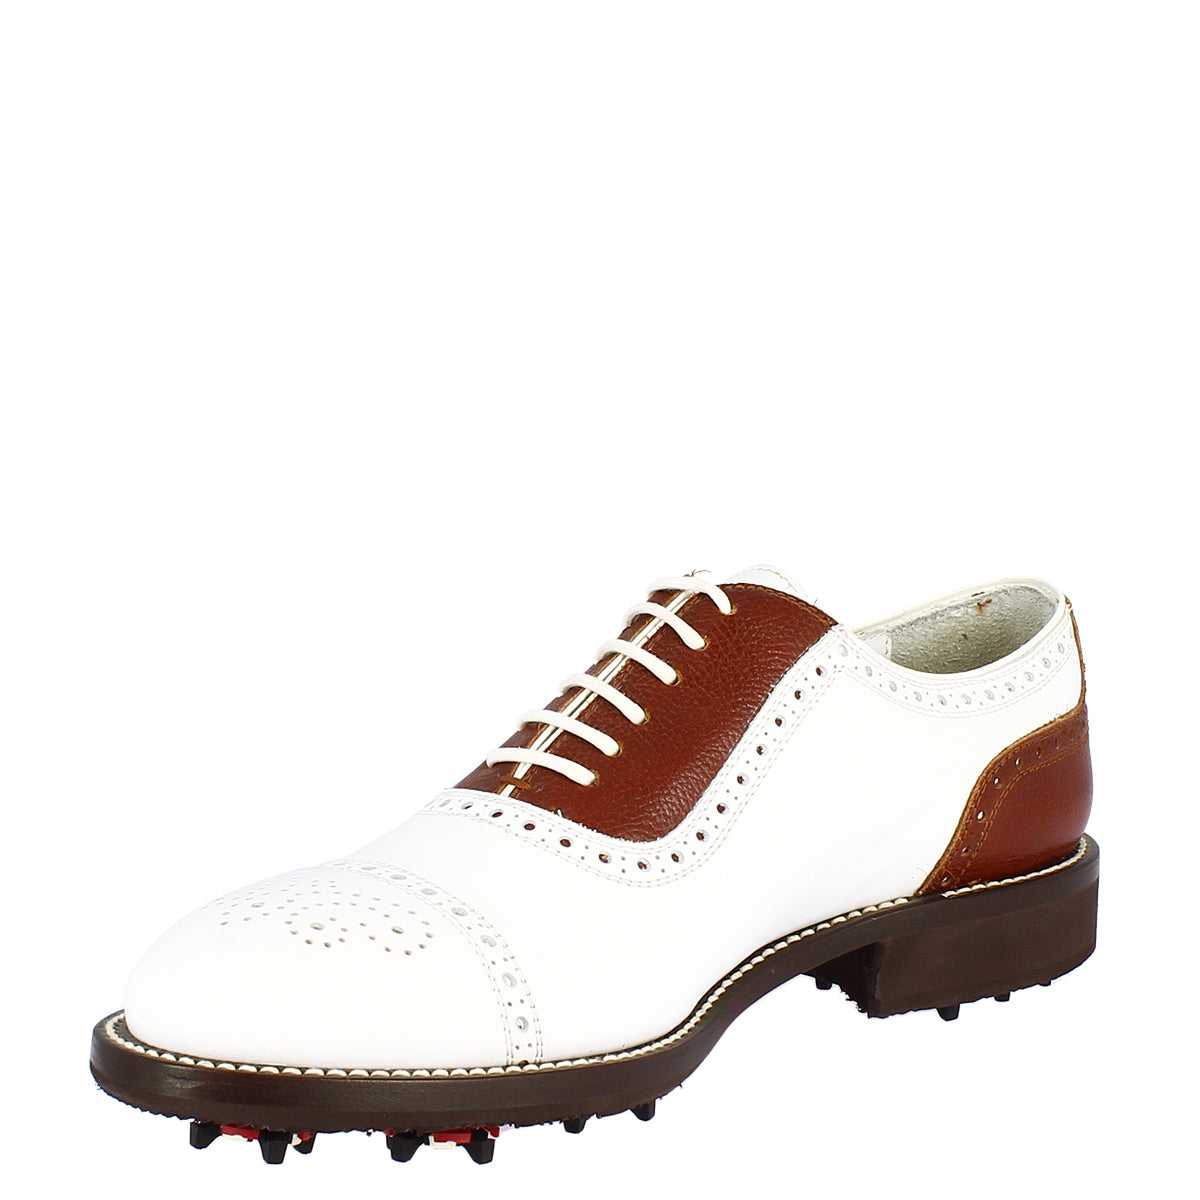 Classic handmade women's golf shoes in brown white calf leather